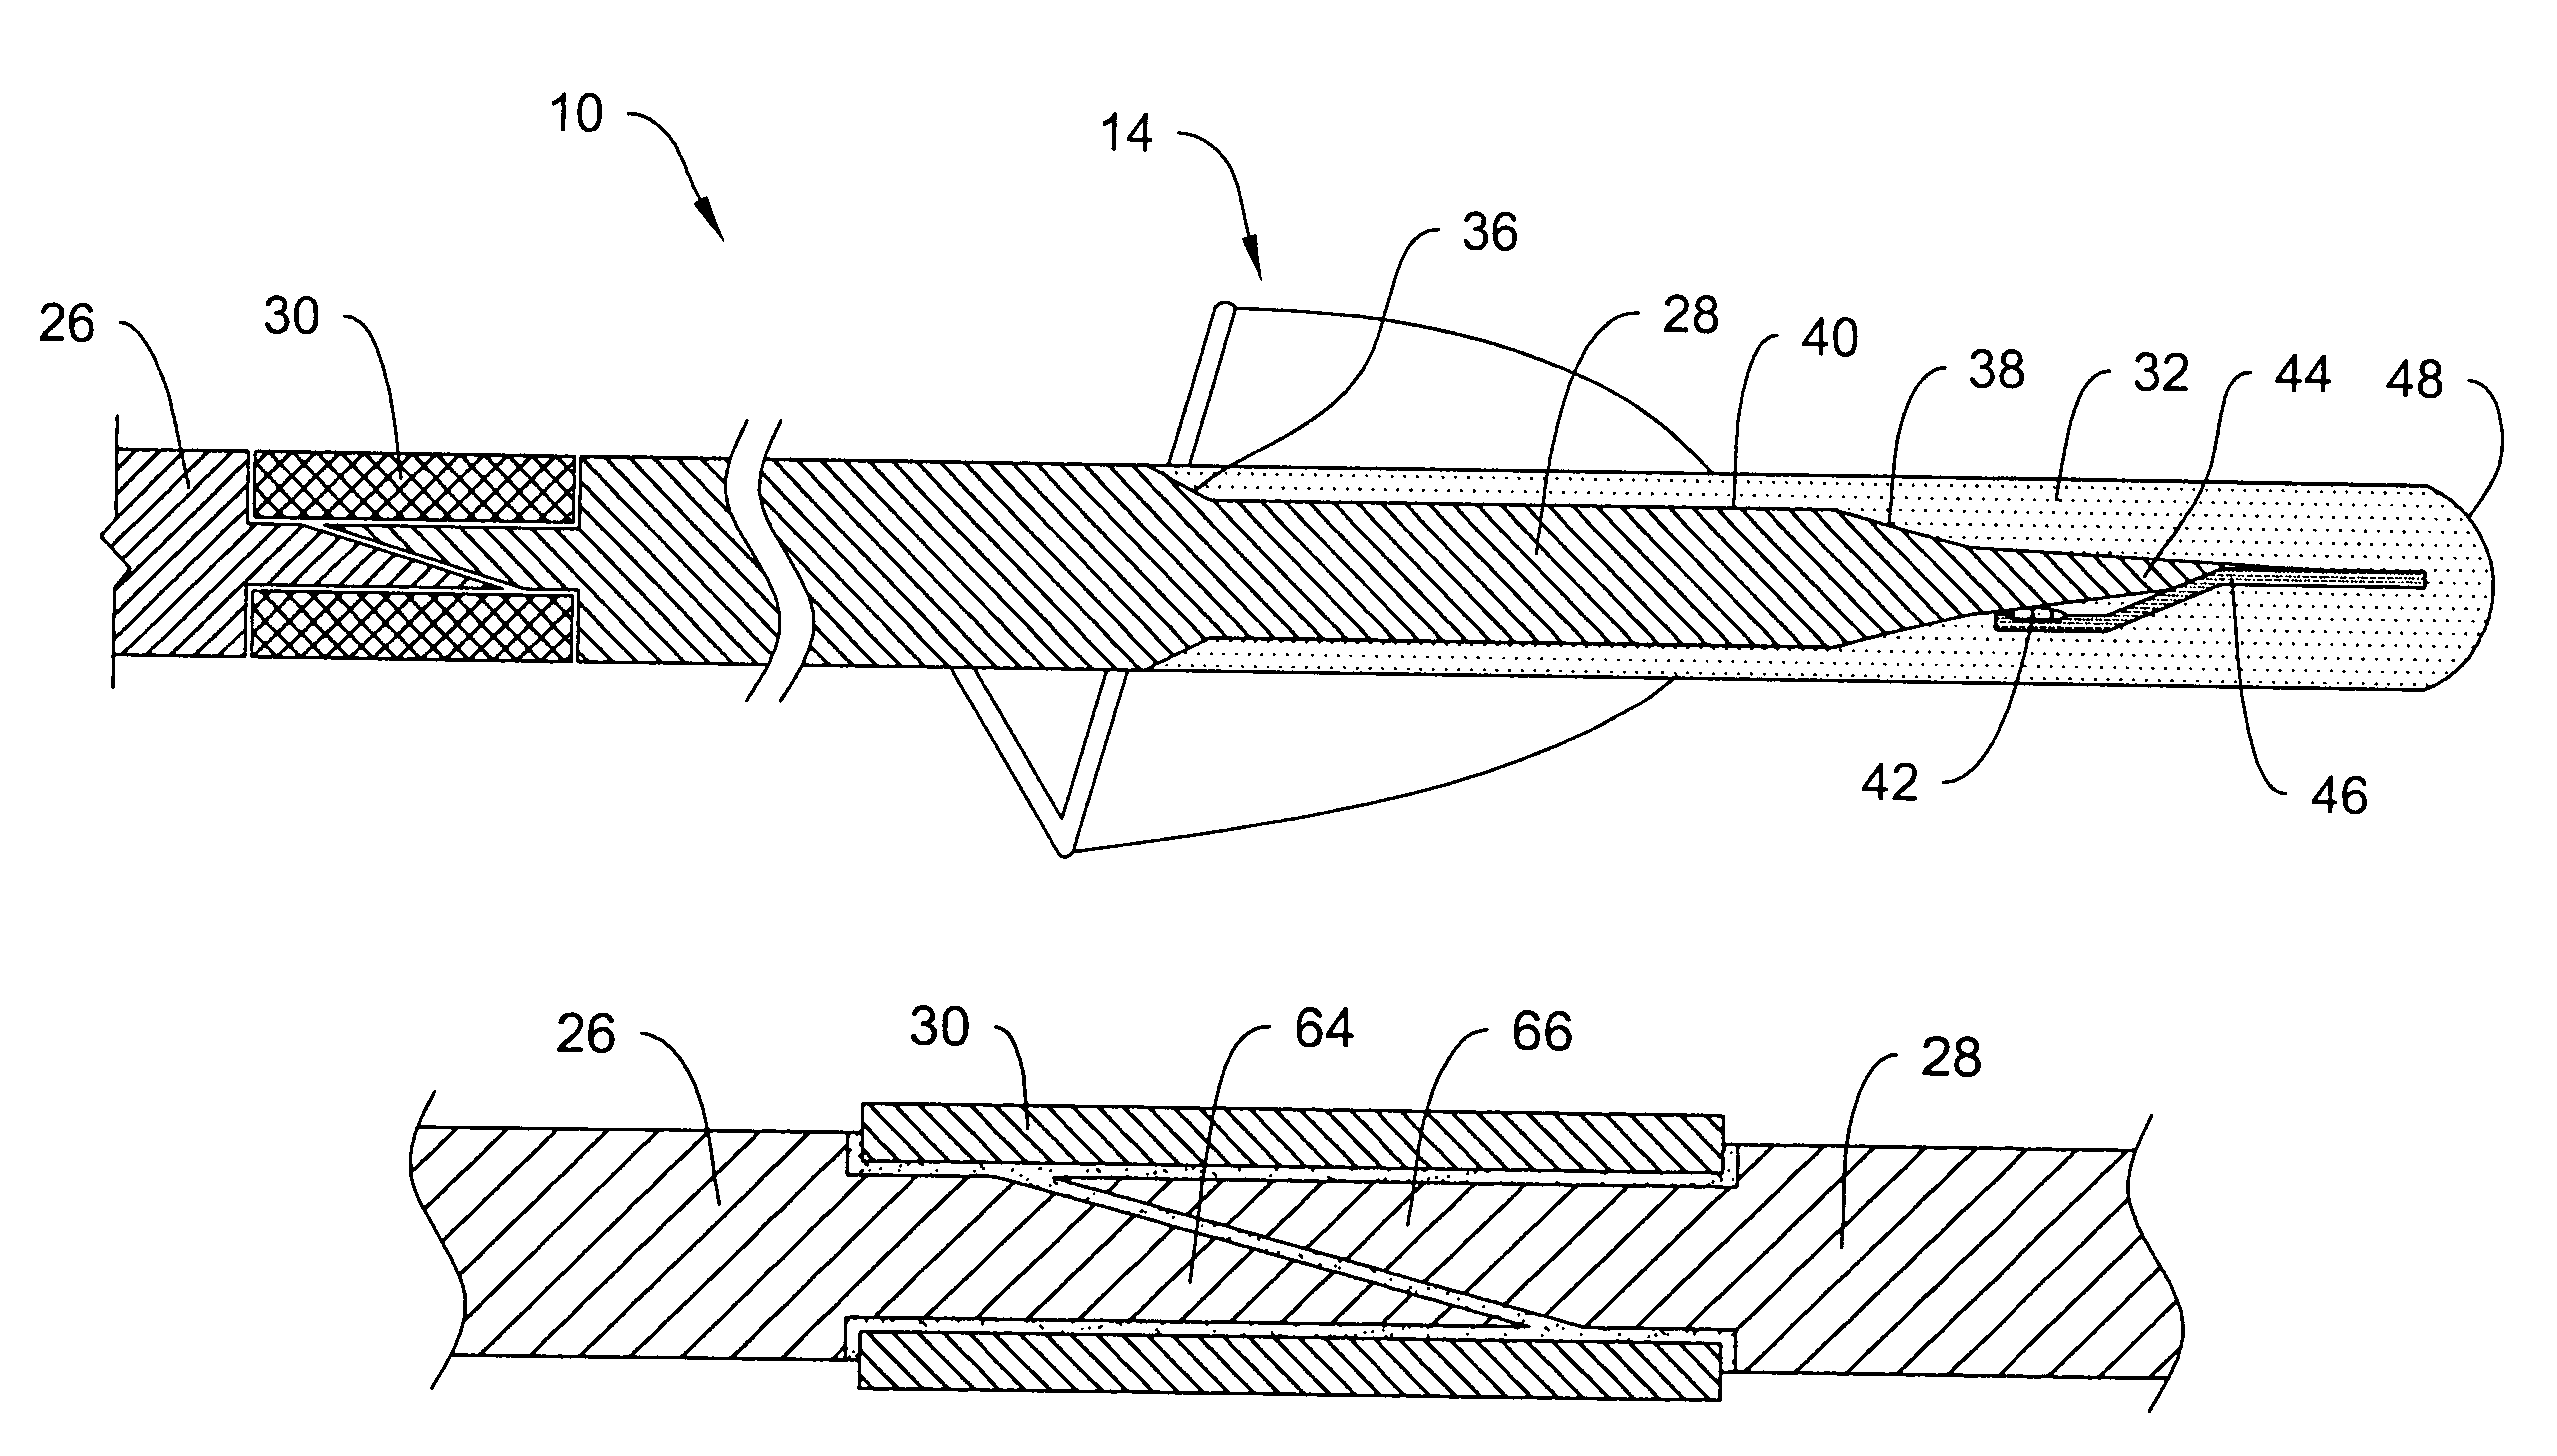 Embolic protection filtering device